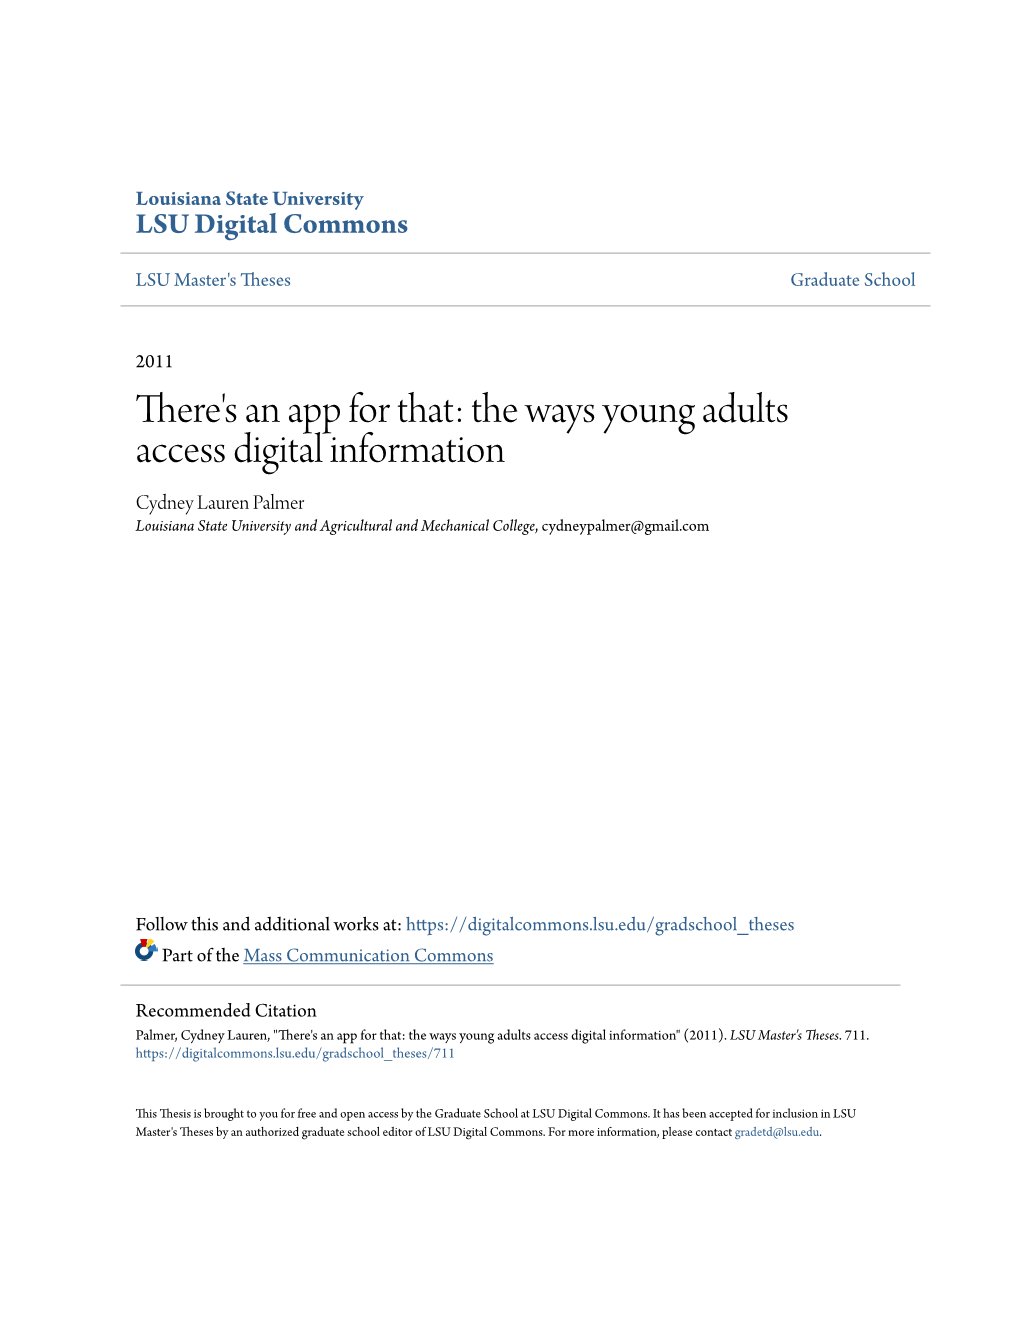 The Ways Young Adults Access Digital Information Cydney Lauren Palmer Louisiana State University and Agricultural and Mechanical College, Cydneypalmer@Gmail.Com